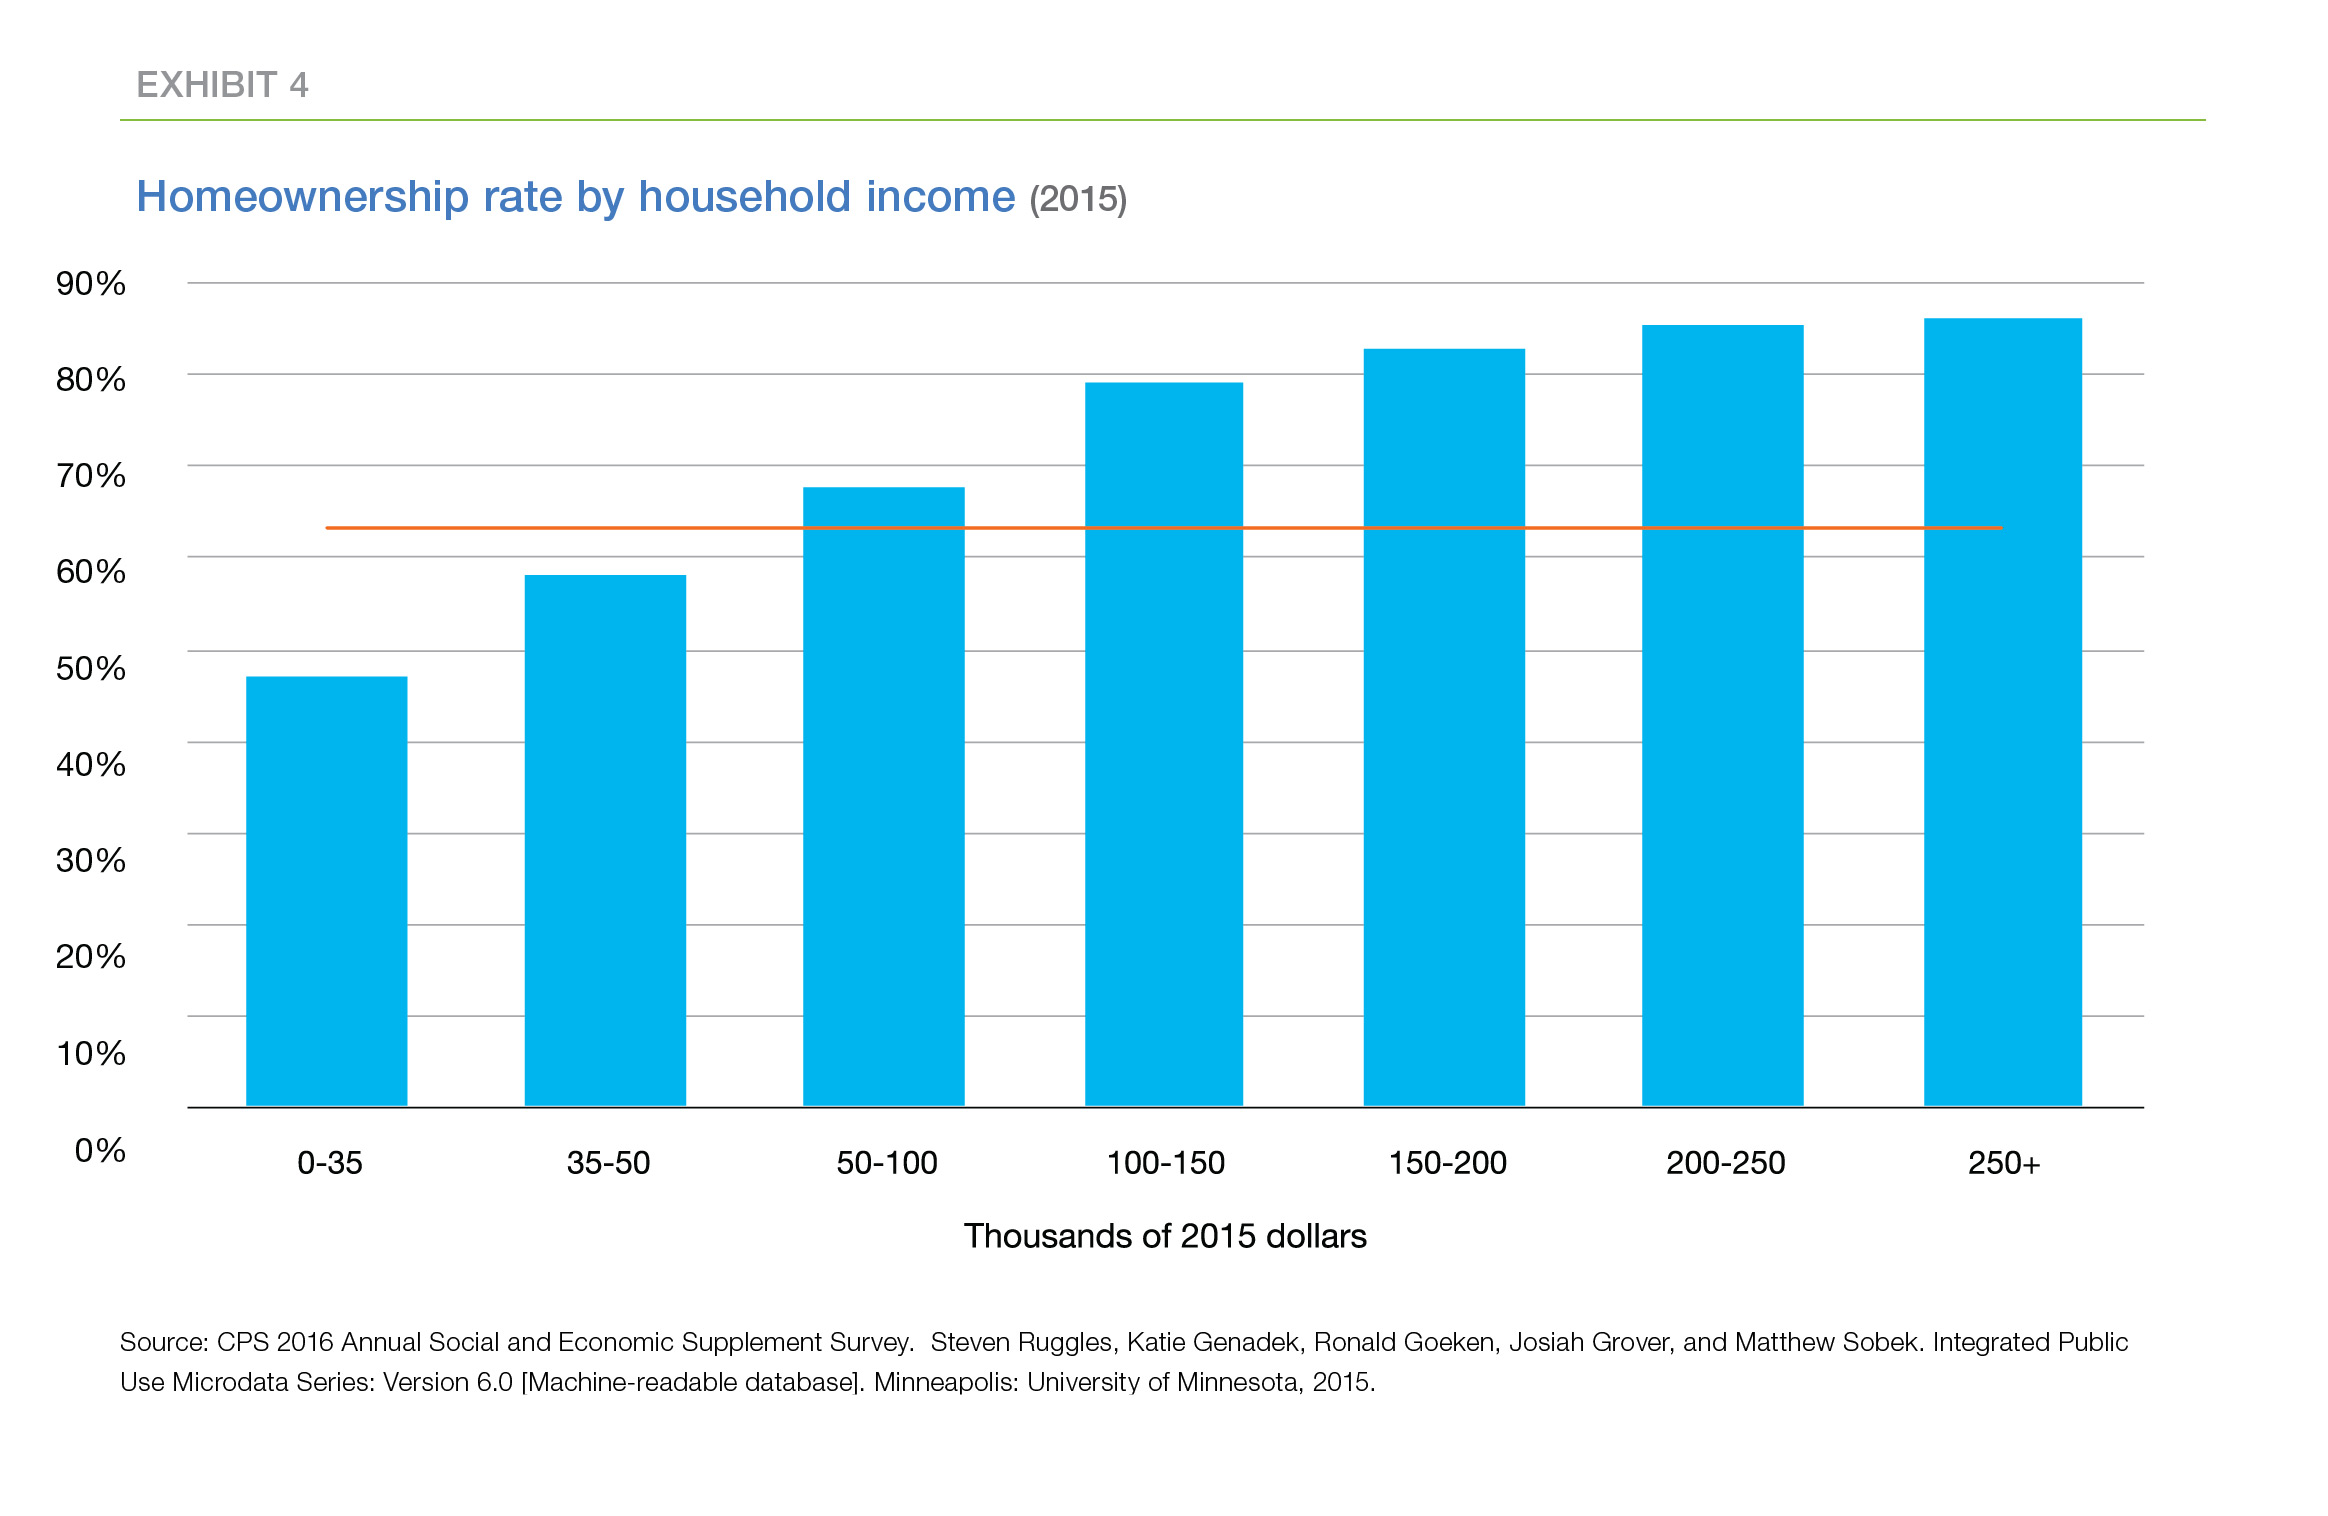 Homeownership rate by household income (2015) chart